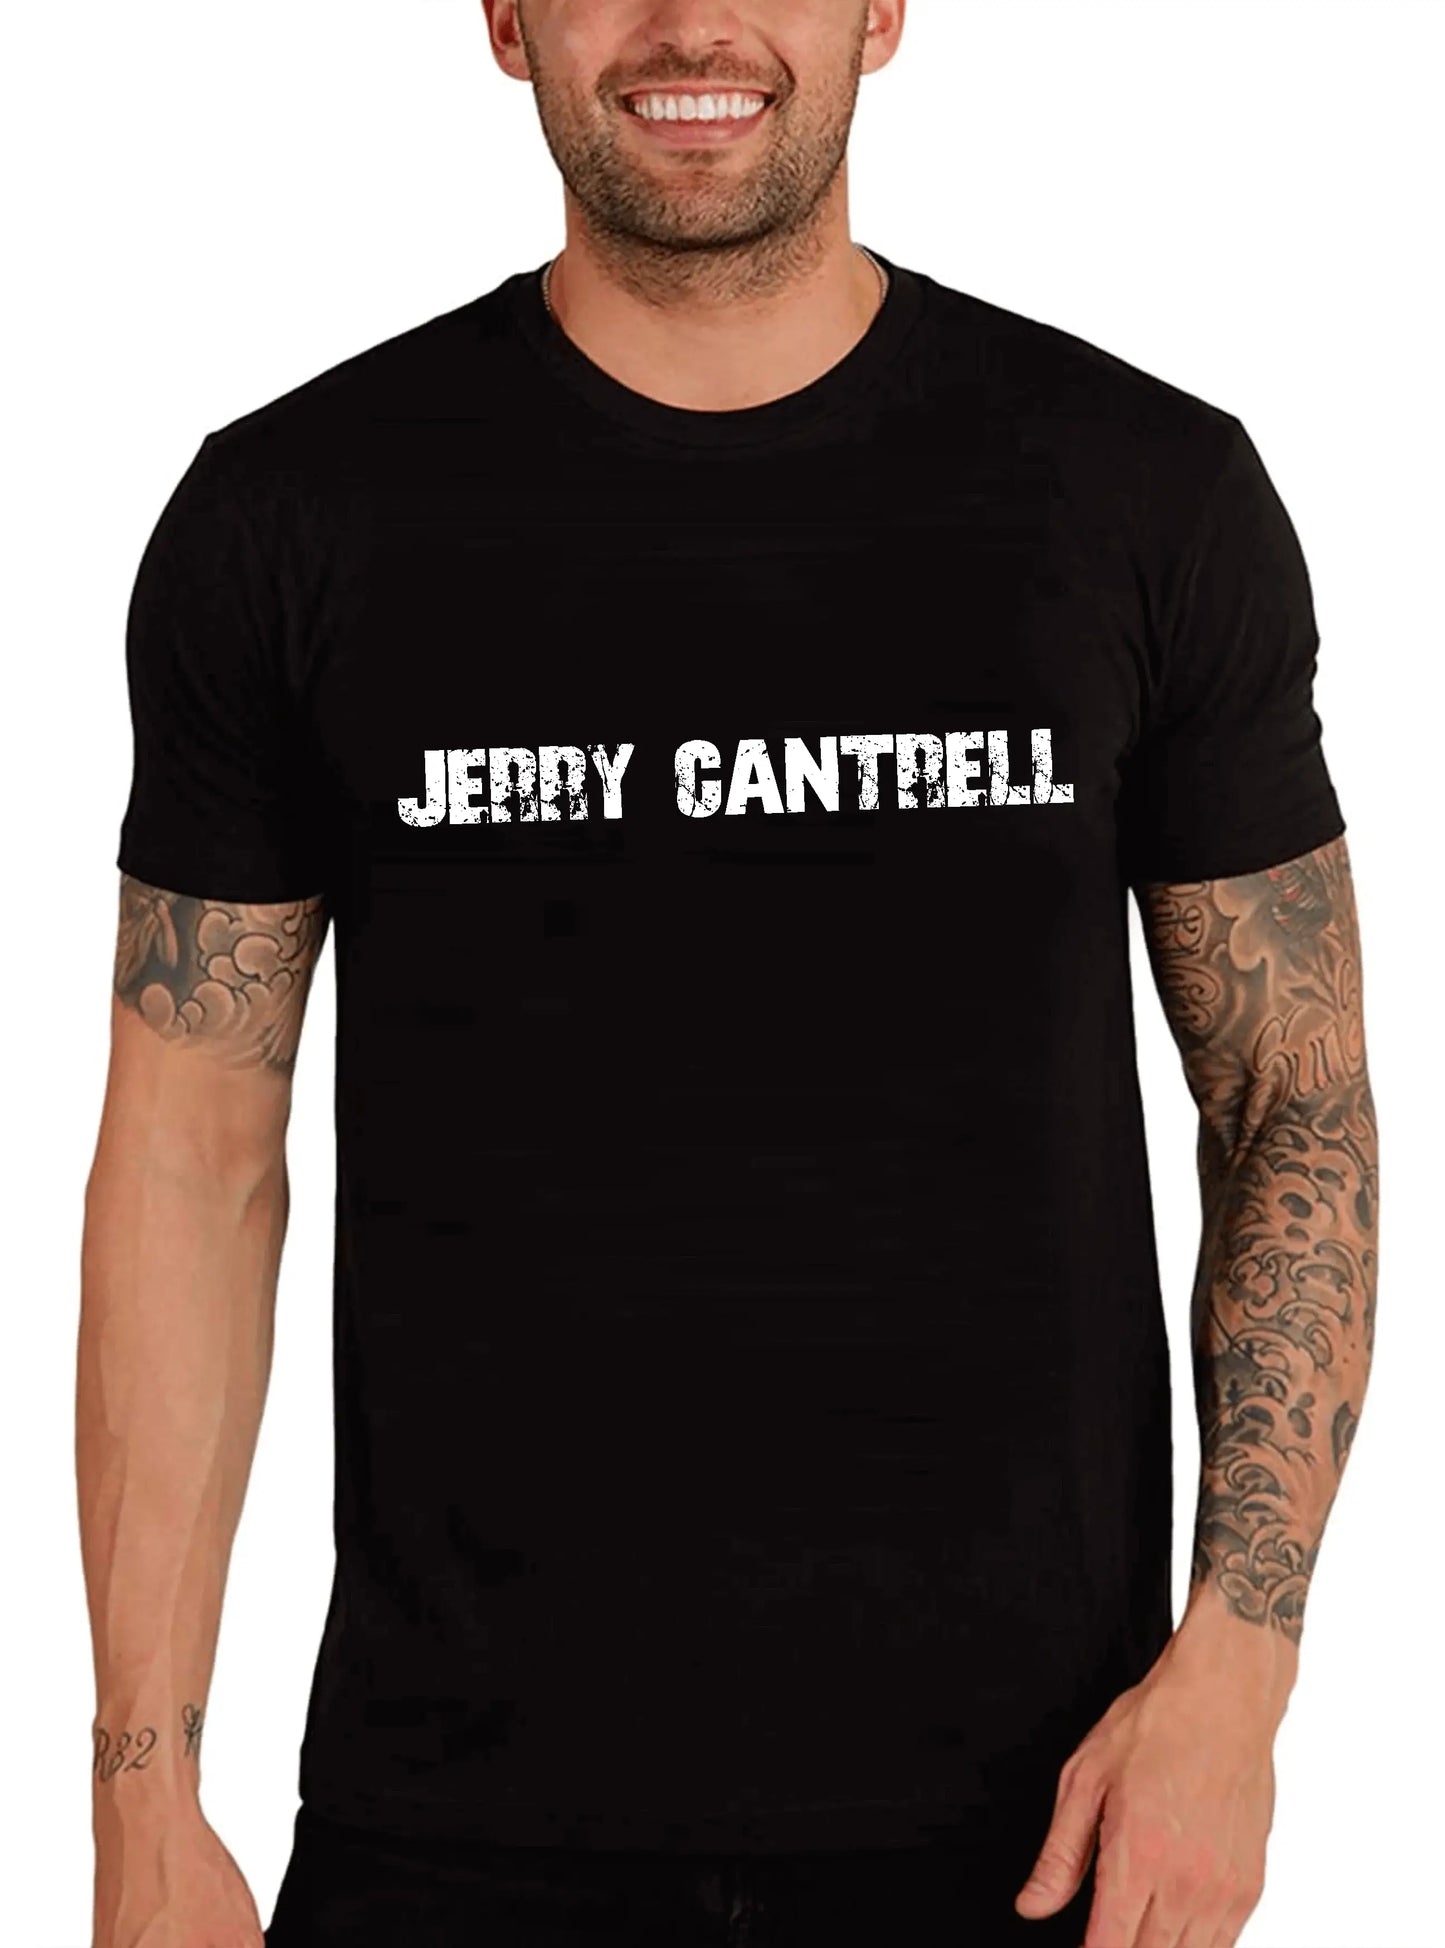 Men's Graphic T-Shirt Jerry Cantrell Eco-Friendly Limited Edition Short Sleeve Tee-Shirt Vintage Birthday Gift Novelty